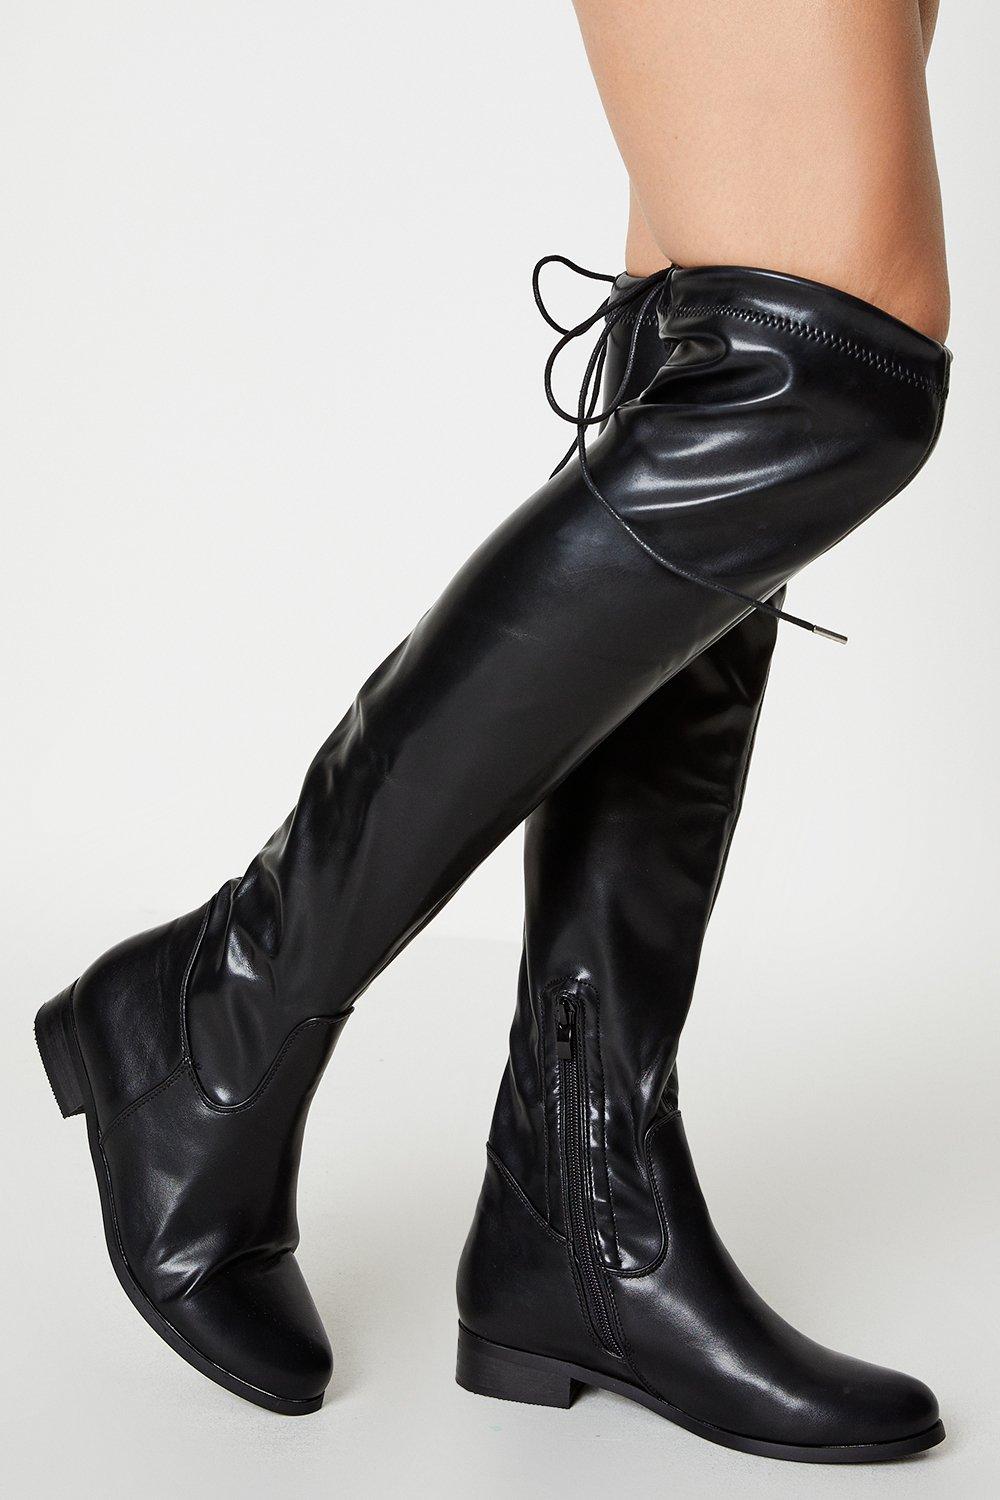 Women’s Kelly Flat Over The Knee Boots - black - 3